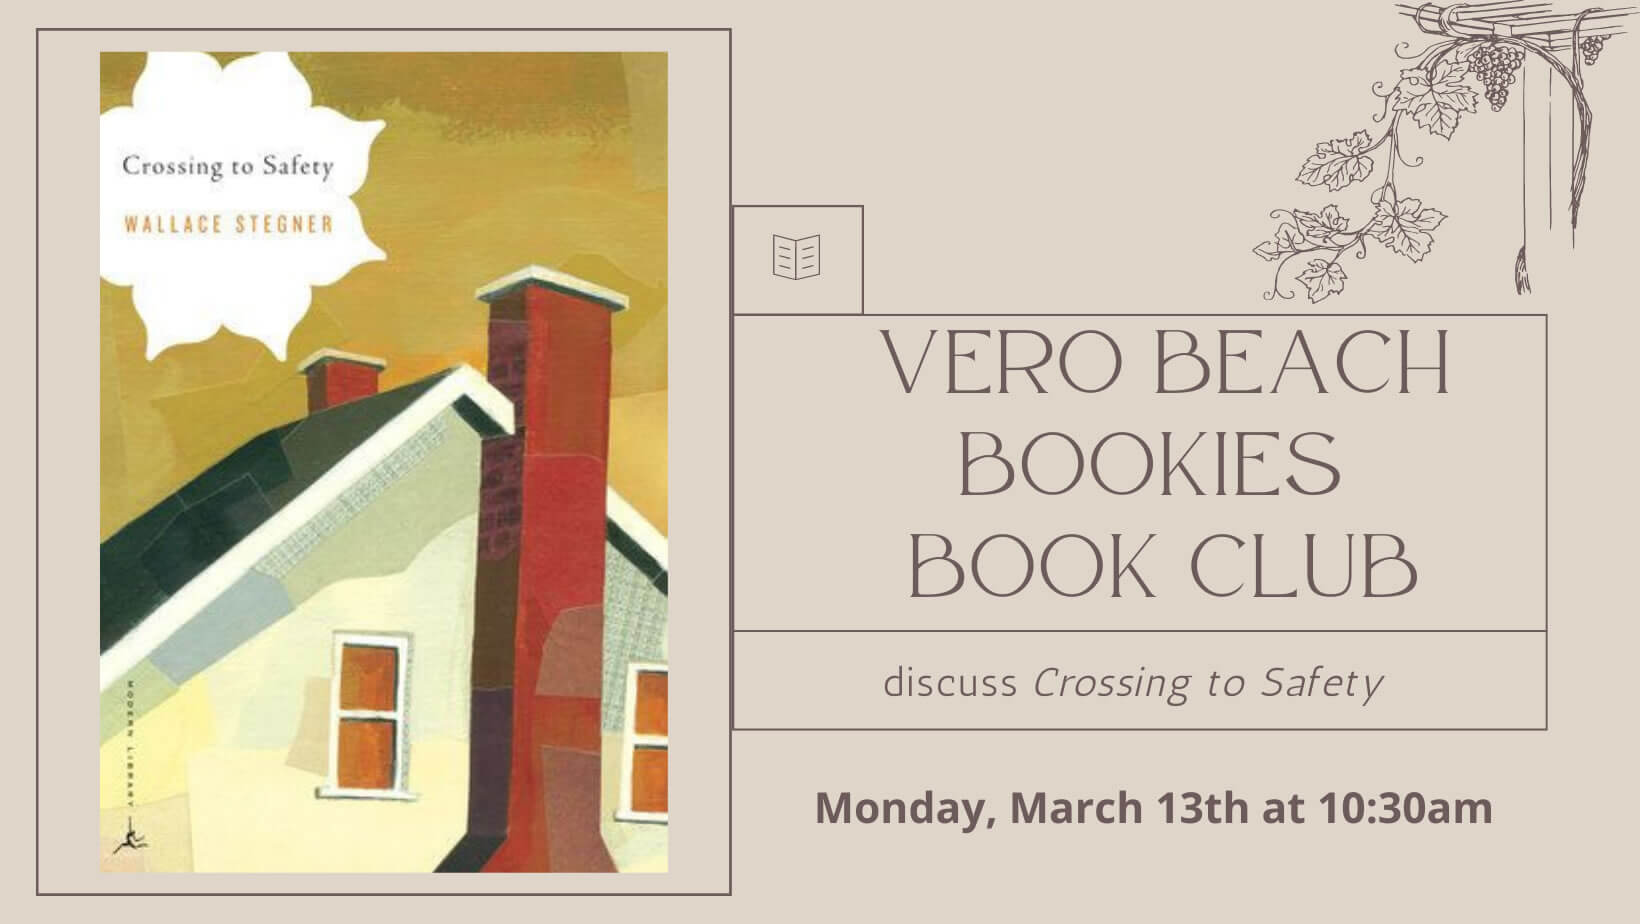 Vero Beach book club discusses Crossing To Safety by Wallace Stegner